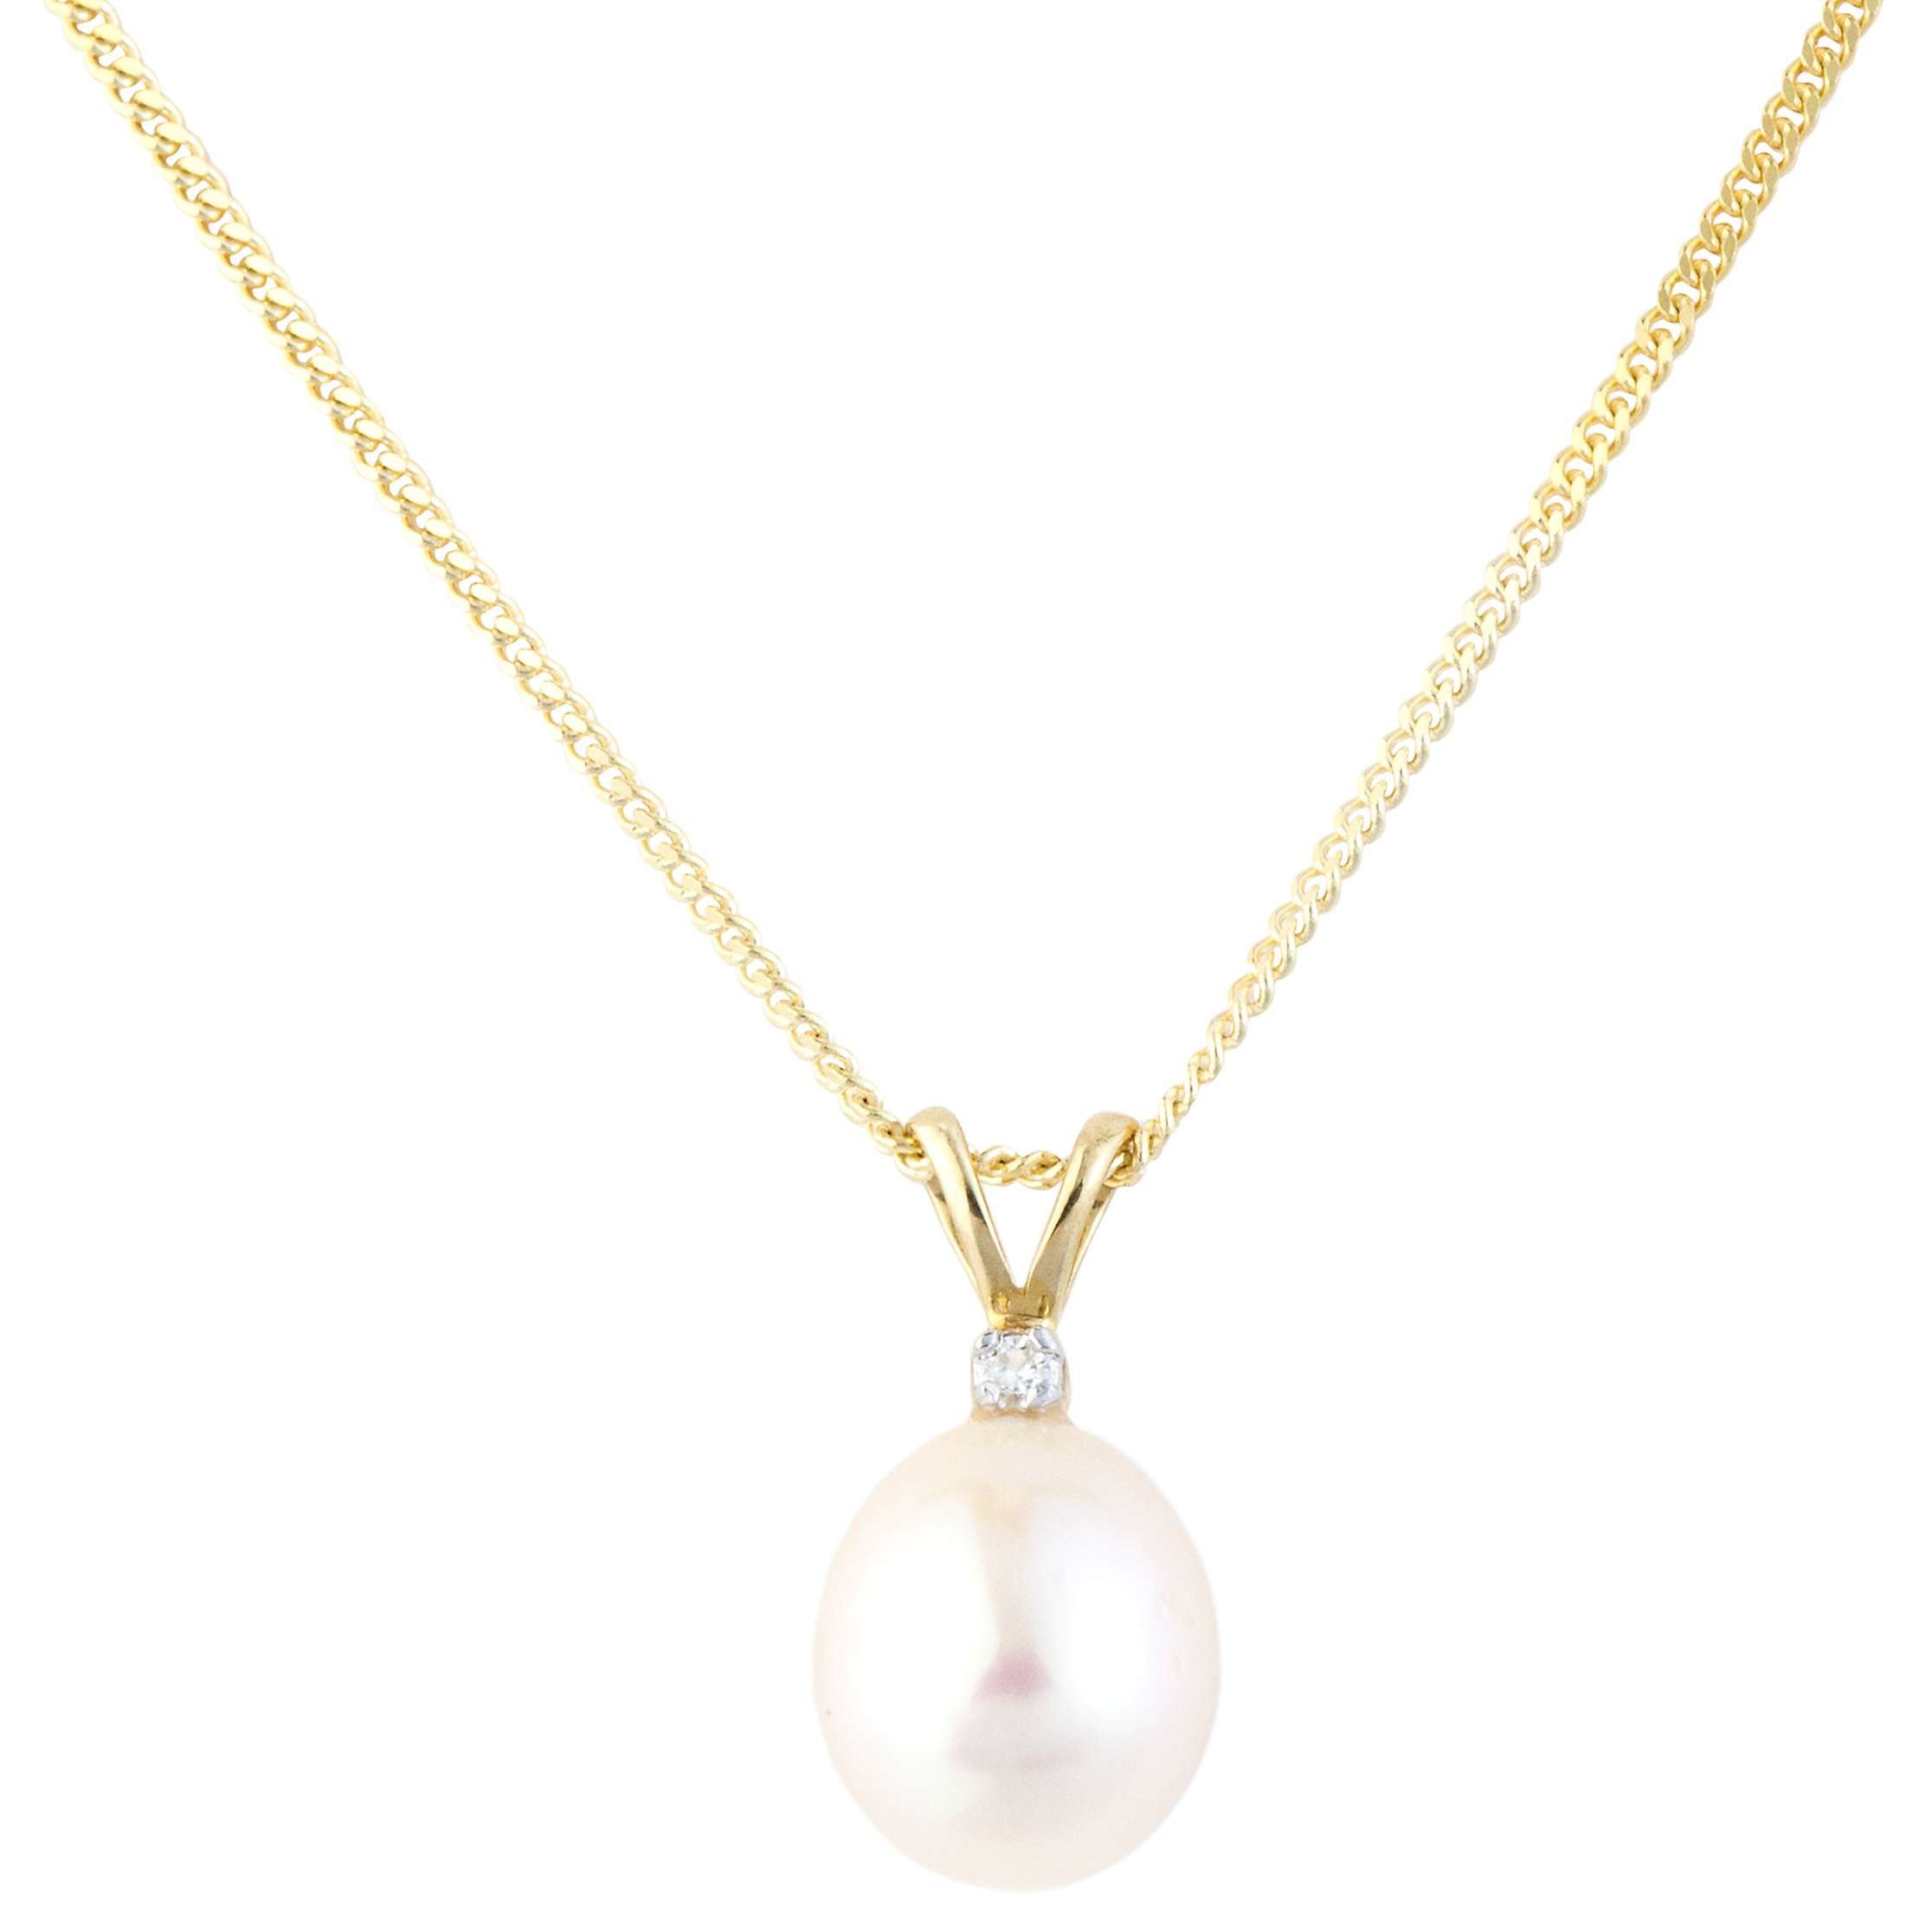 Buy A B Davis 9ct Gold Diamond Pearl Pendant Necklace, Gold/Pink Online at johnlewis.com